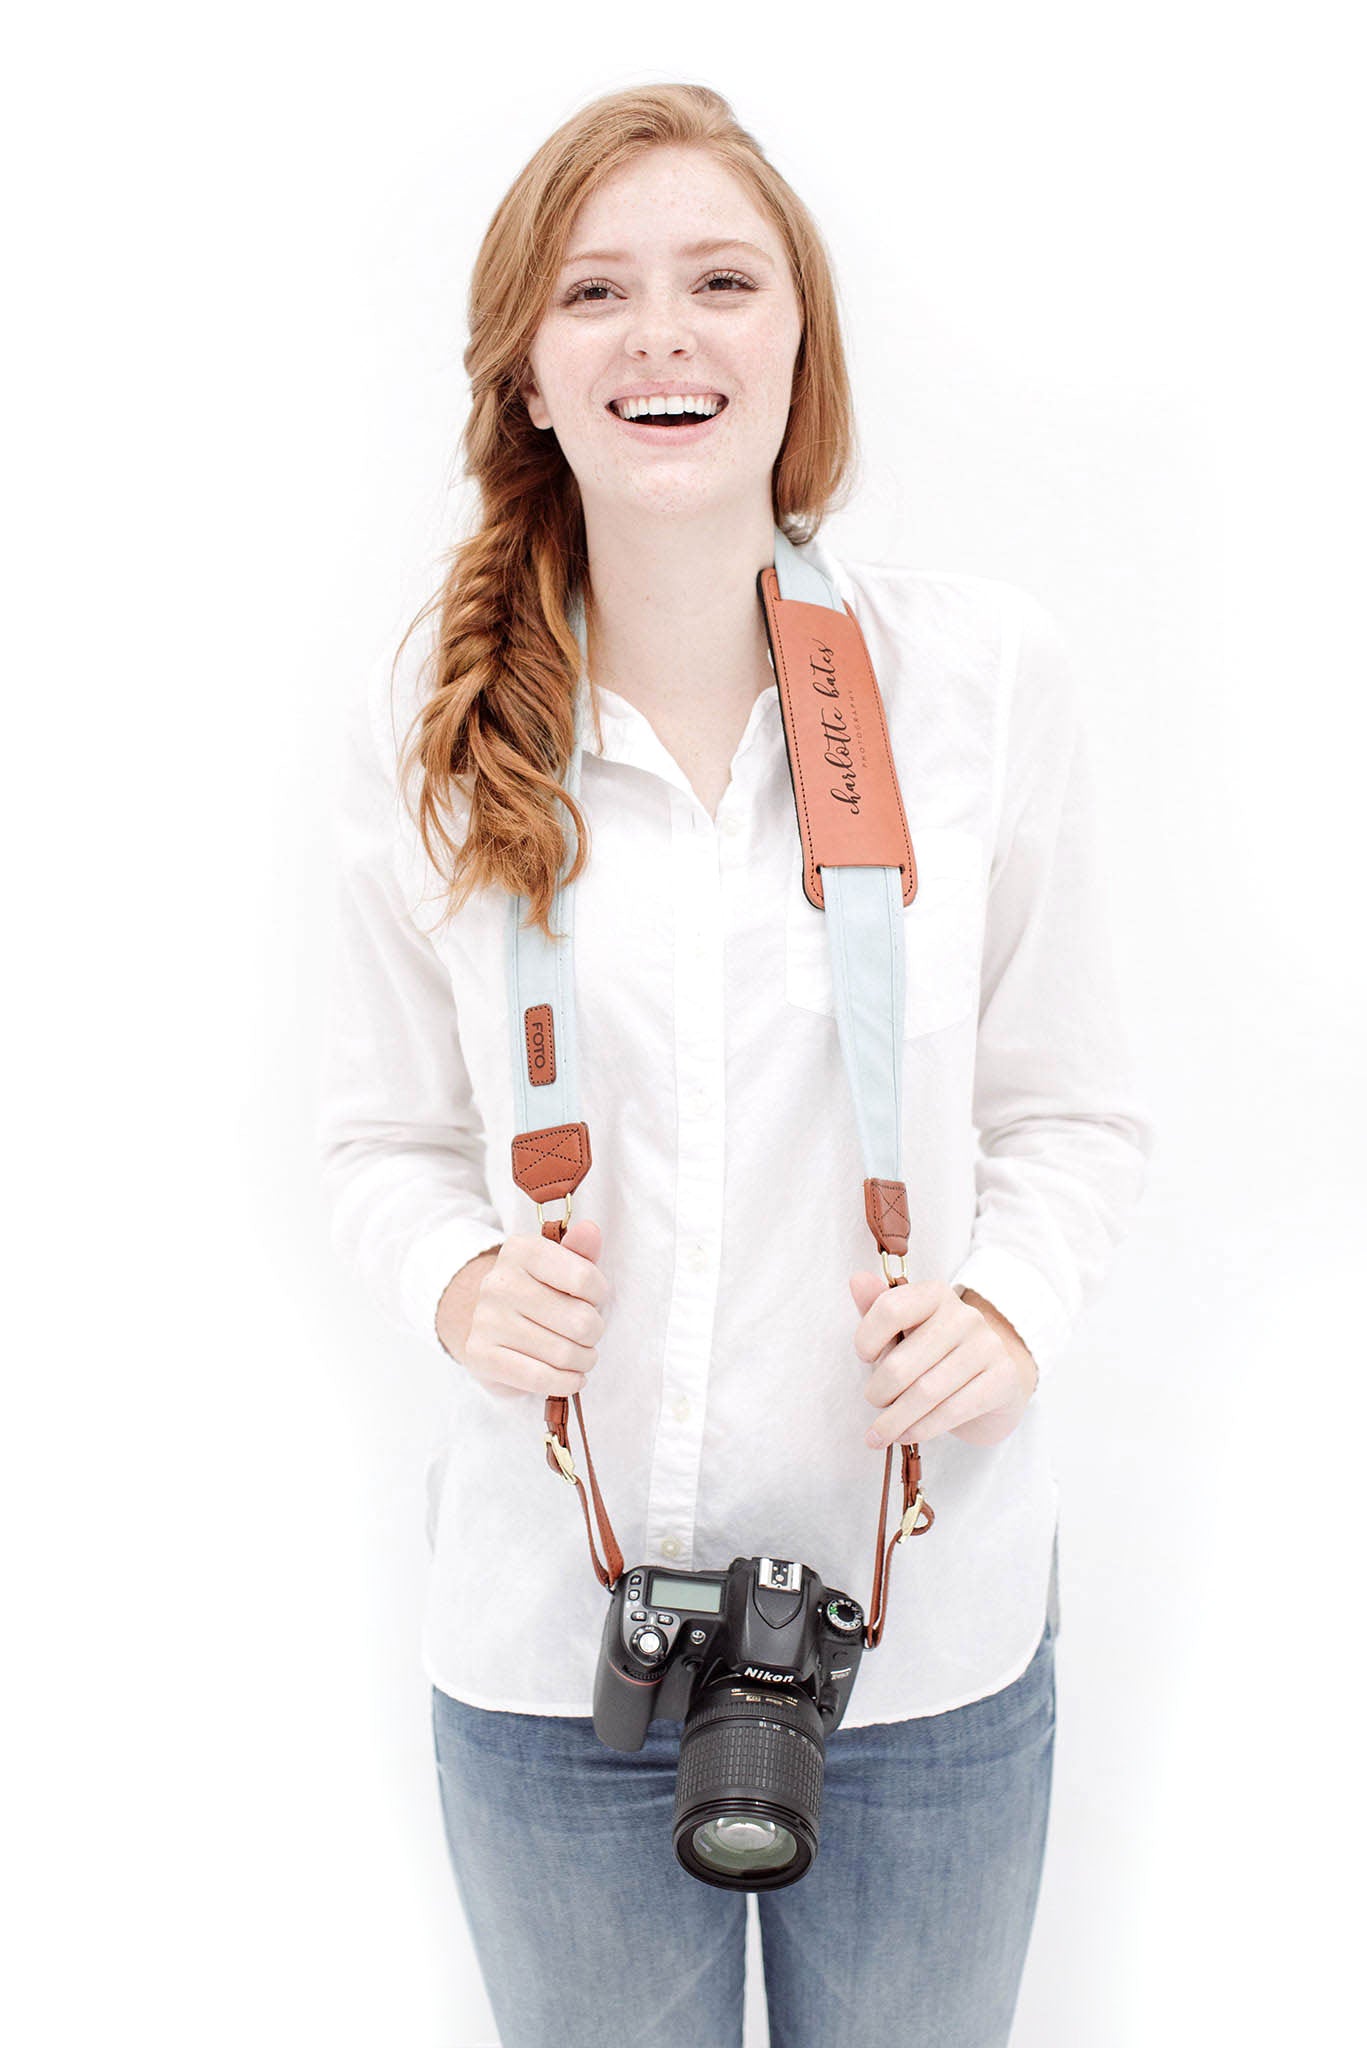 FOTO | Sky Fotostrap - a light blue canvas and genuine leather camera strap that can be personalized with a monogram or business logo, making it the perfect personalized gift! 